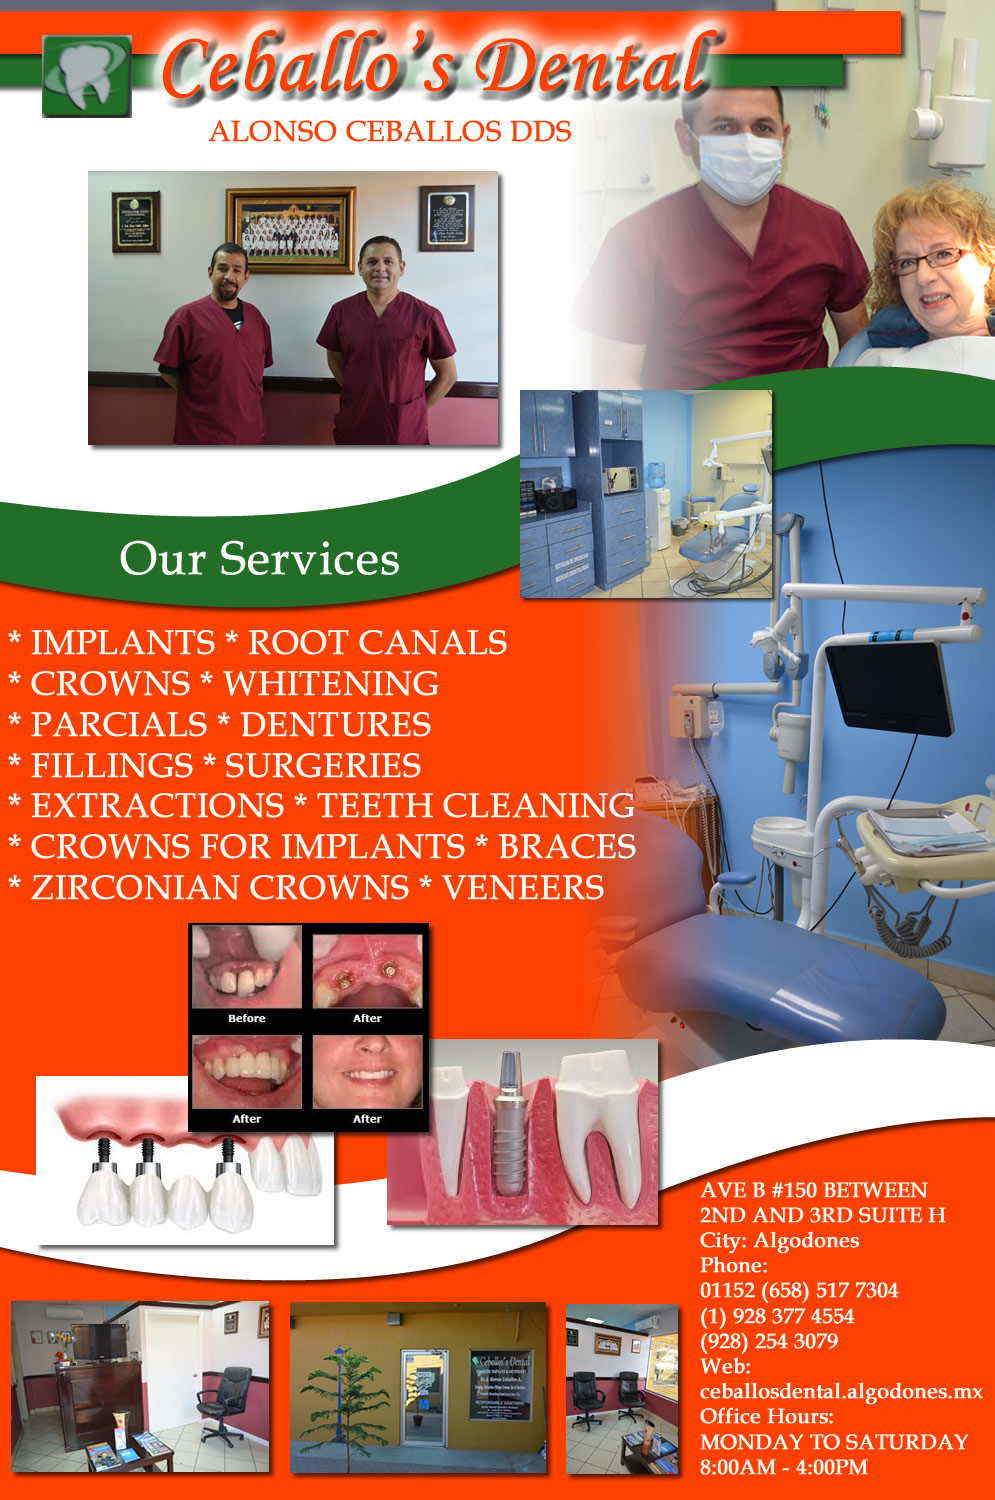 CEBALLOS DENTAL DDS ALONSO CEBALLOS in Algodones  in Algodones  * IMPLANTS * ROOT CANALS * CROWNS * WHITENING * PARCIALS * DENTURES * FILLINGS * SURGERIES * EXTRACTIONS * TEETH CLEANING * CROWNS FOR IMPLANTS * BRACES * ZIRCONIAN CROWNS * VENEERS          IMPLANTS  ROOT CANALS  CROWNS  WHITENING  PARCIALS  DENTURES  FILLINGS  SURGERIES  EXTRACTIONS TEETH CLEANING  CROWNS FOR IMPLANTS BRACES  ZIRCONIAN CROWNS  VENEERS        